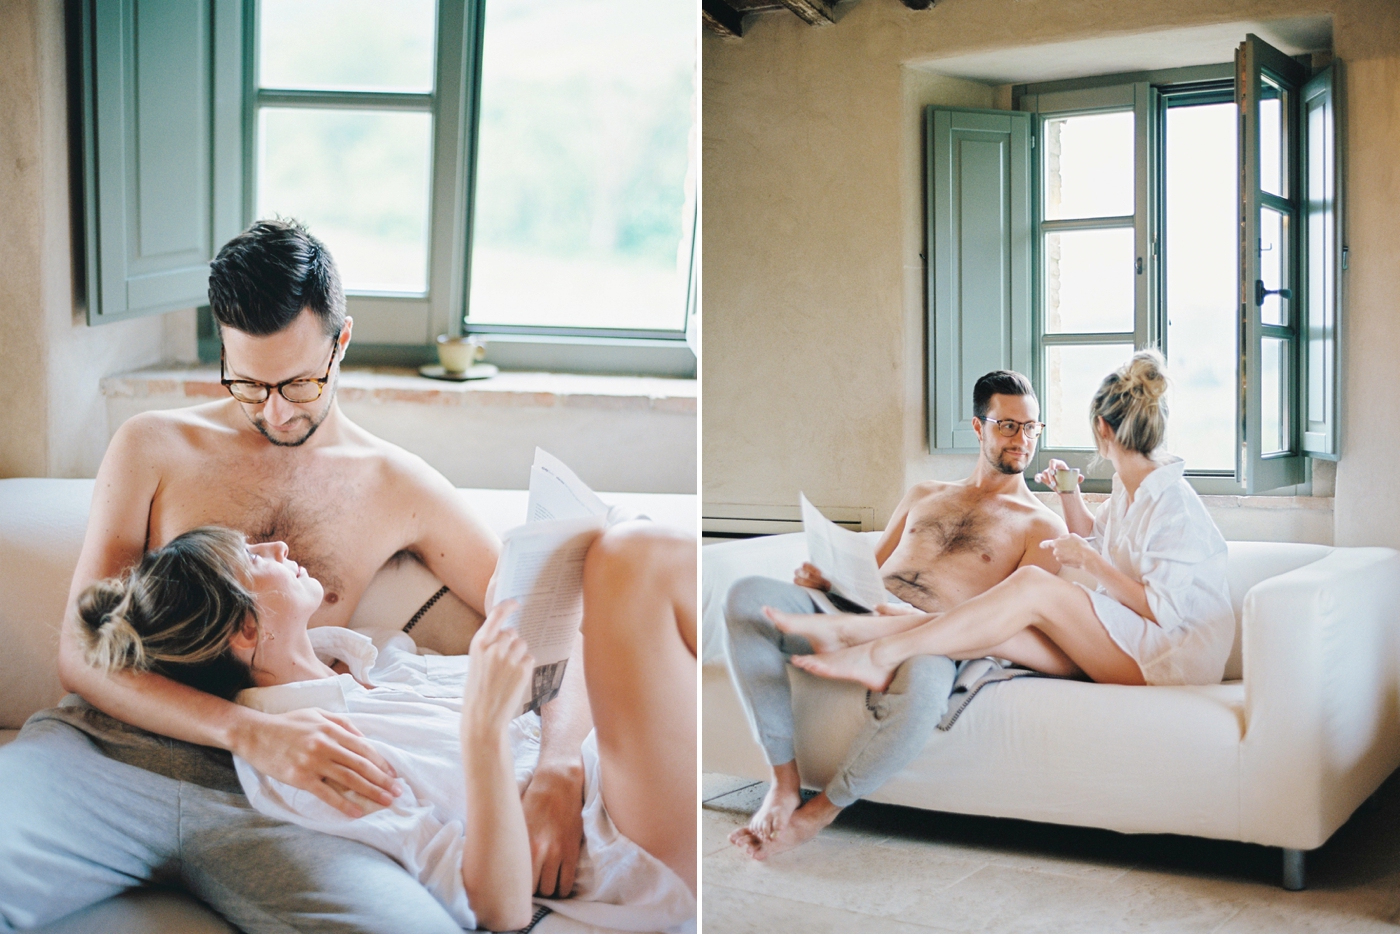 In home lifestyle session | Luxury villa in tuscany italy | fine art film wedding photographer justine milton | travel and fashion blogger